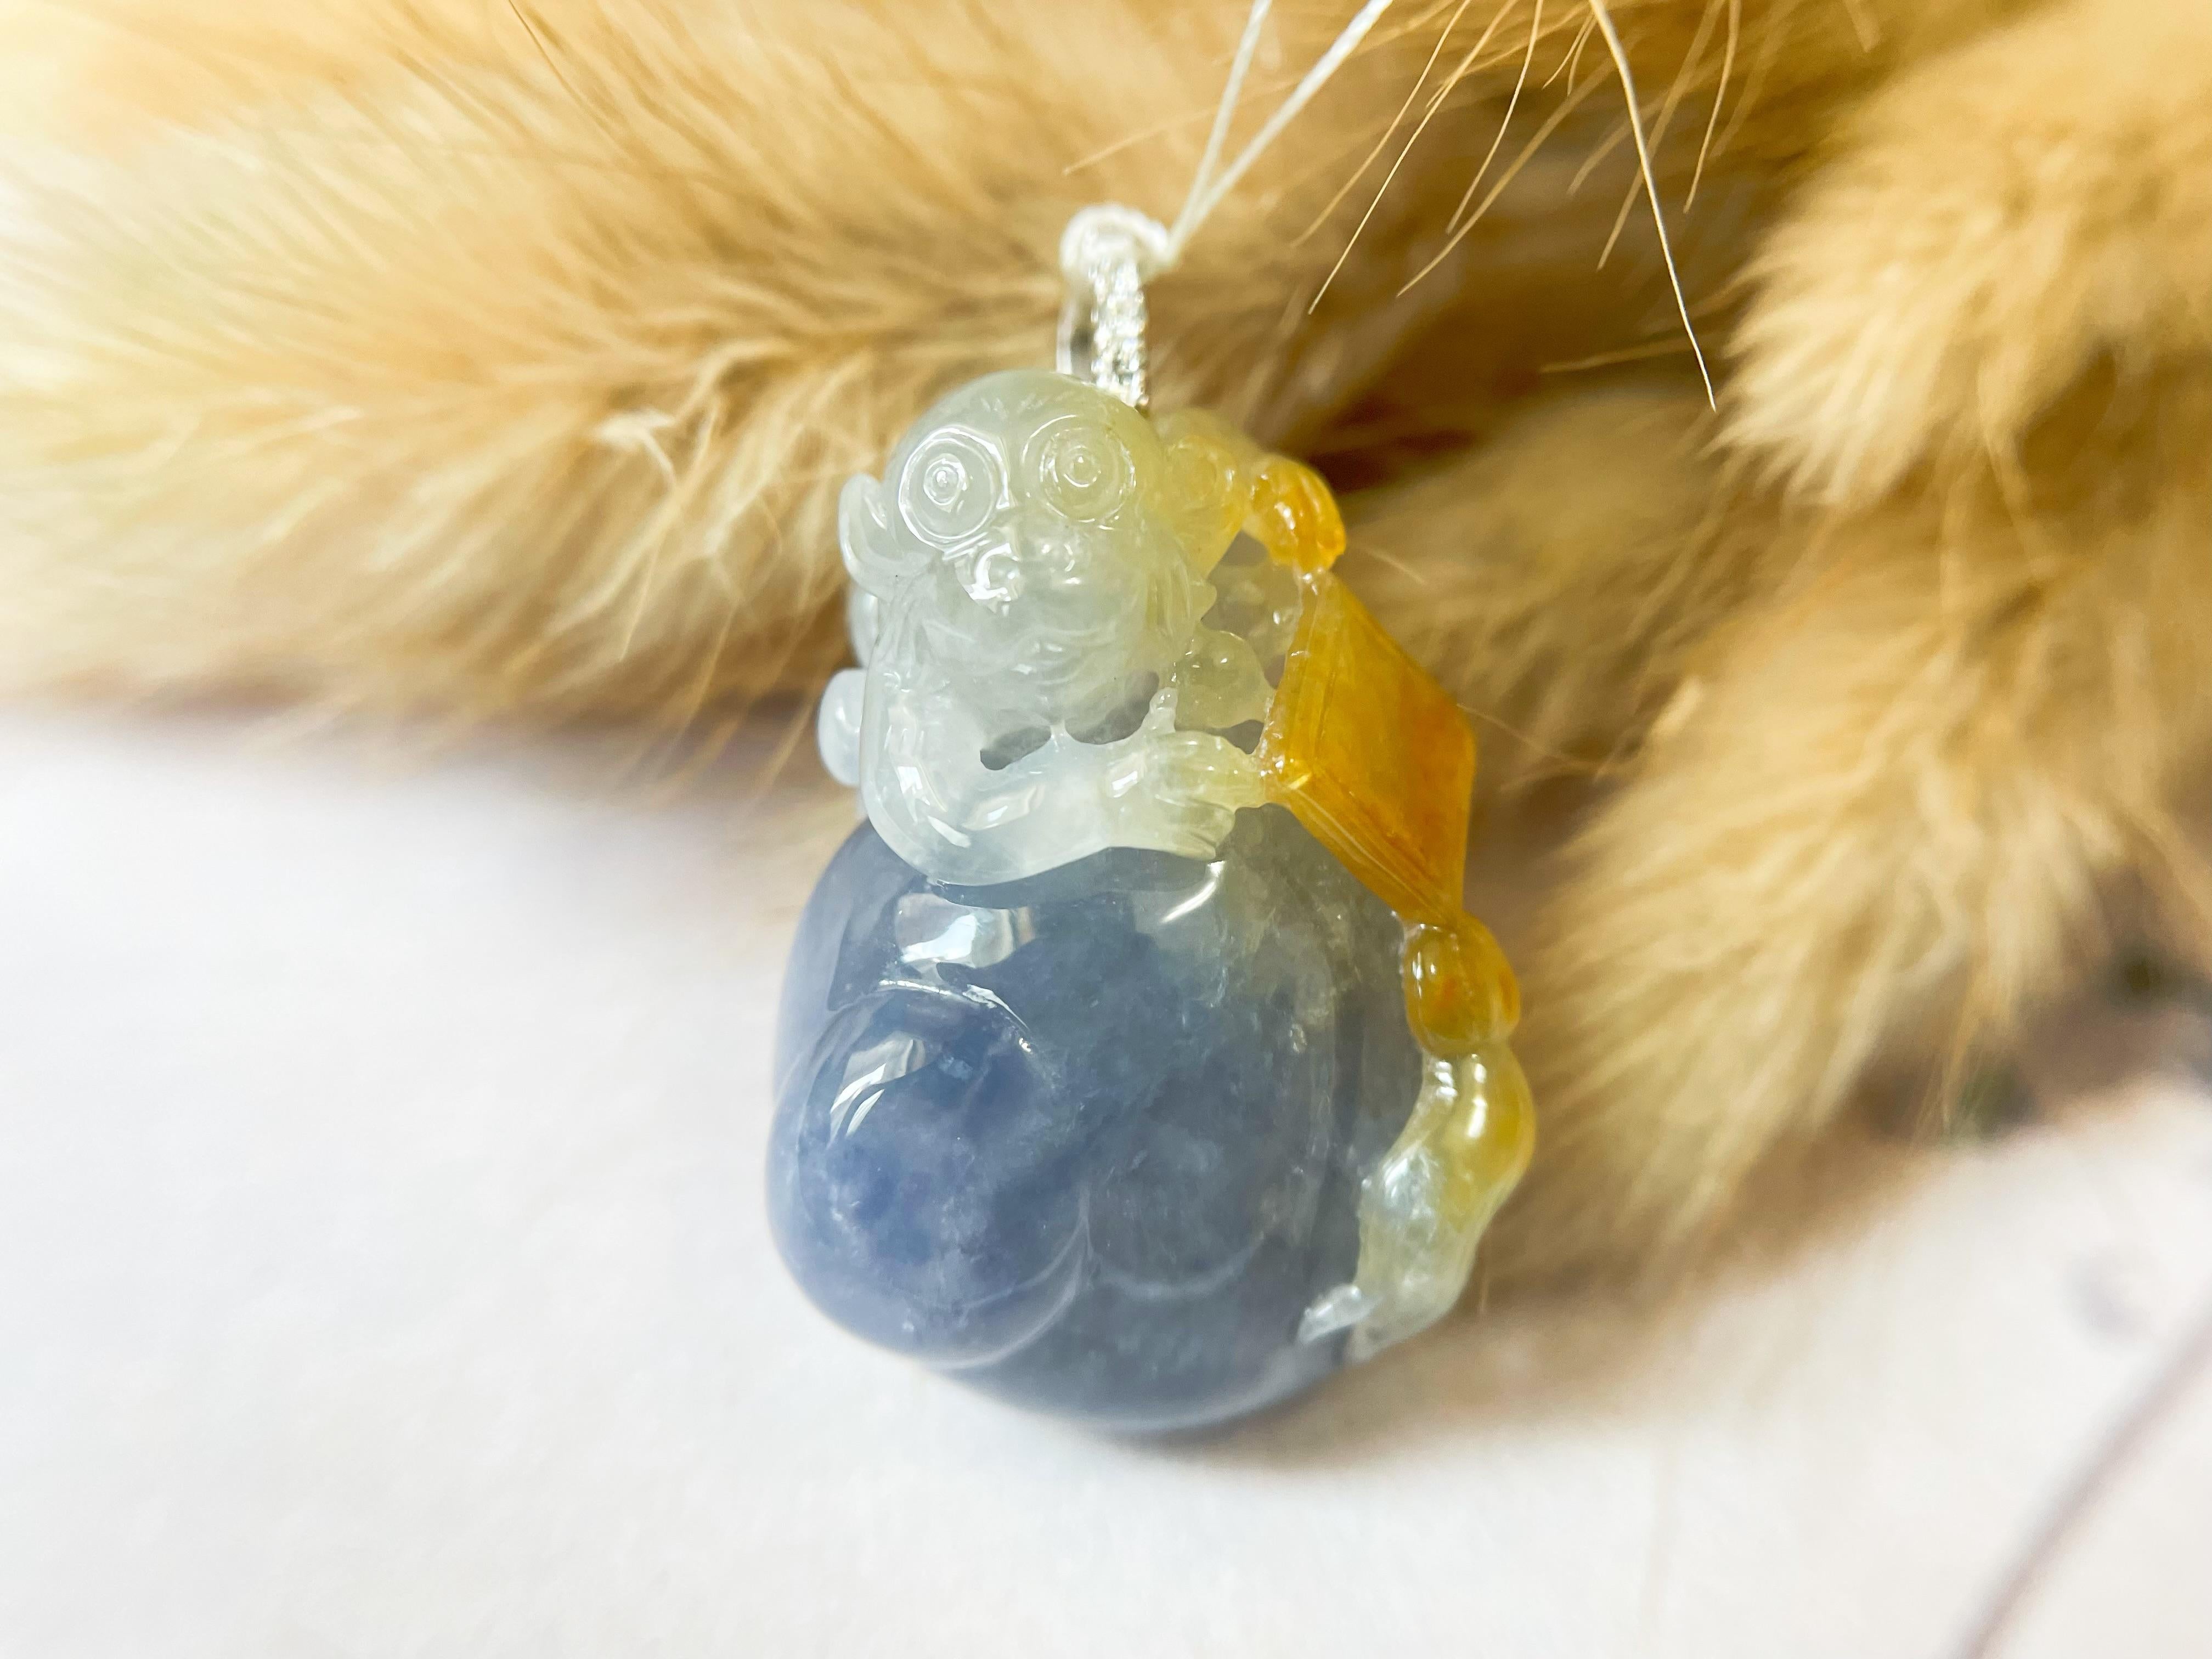 Mixed Cut 79.88 Ct Natural Myanmar Lavender Honey Yellow Icy Type Monkey Jadeite Pendant For Sale